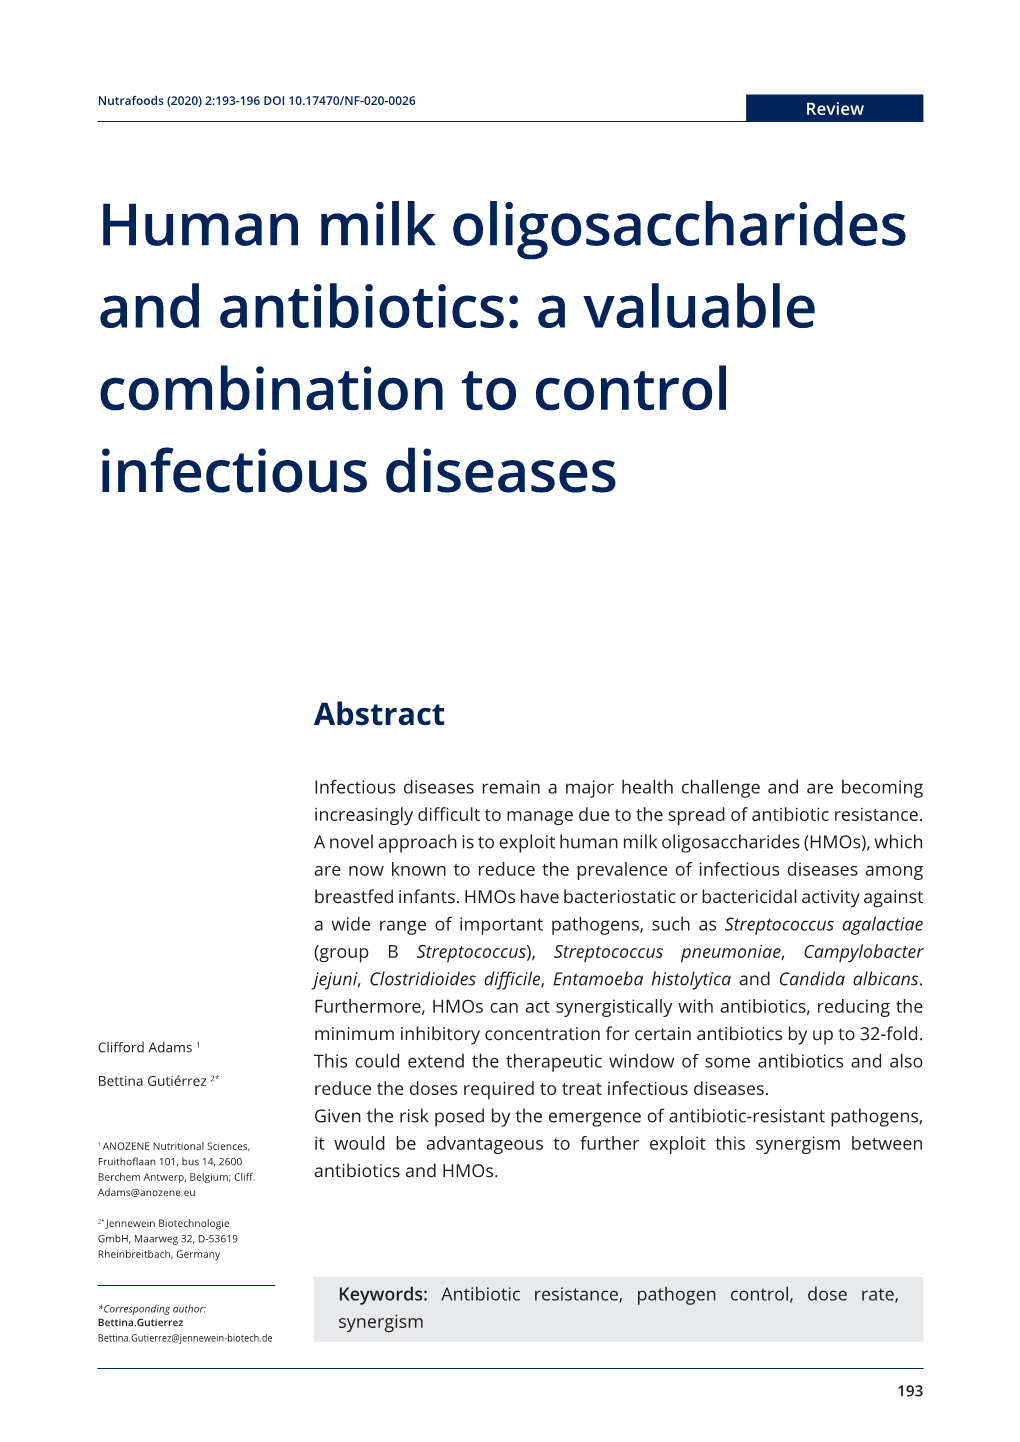 Human Milk Oligosaccharides and Antibiotics: a Valuable Combination to Control Infectious Diseases